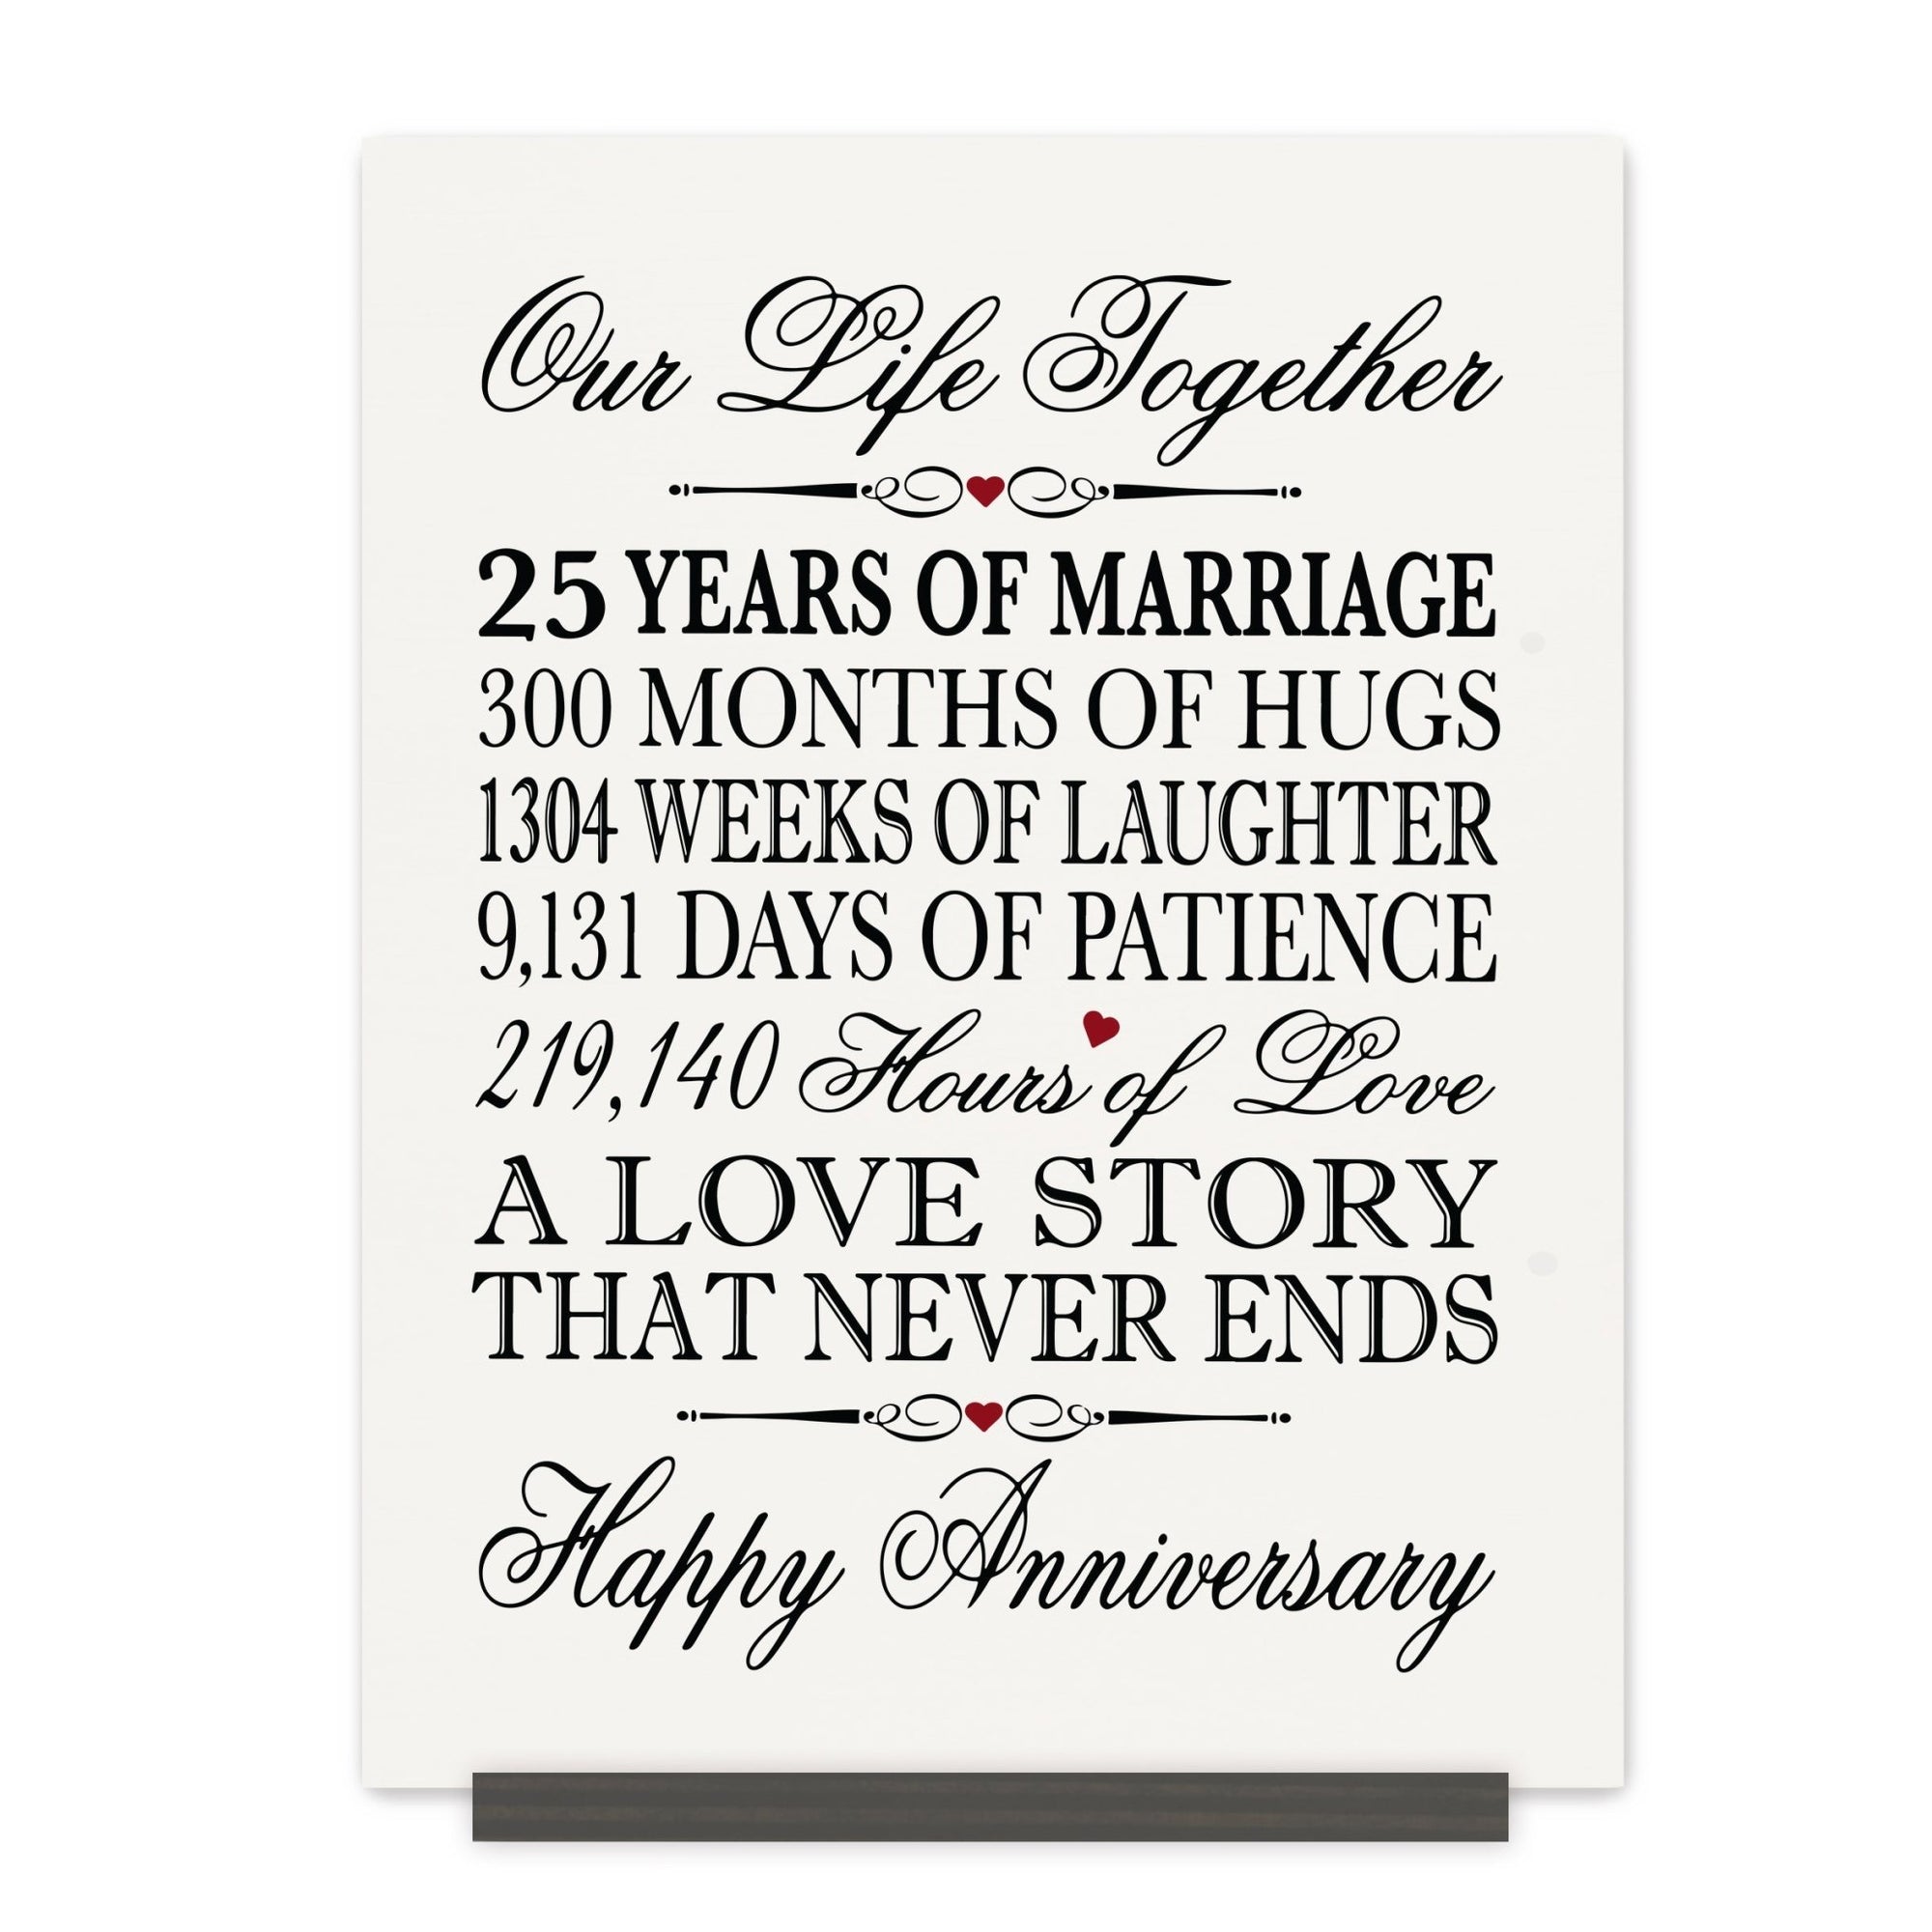 25th Wedding Anniversary Wall Plaque - Our Life Together - LifeSong Milestones